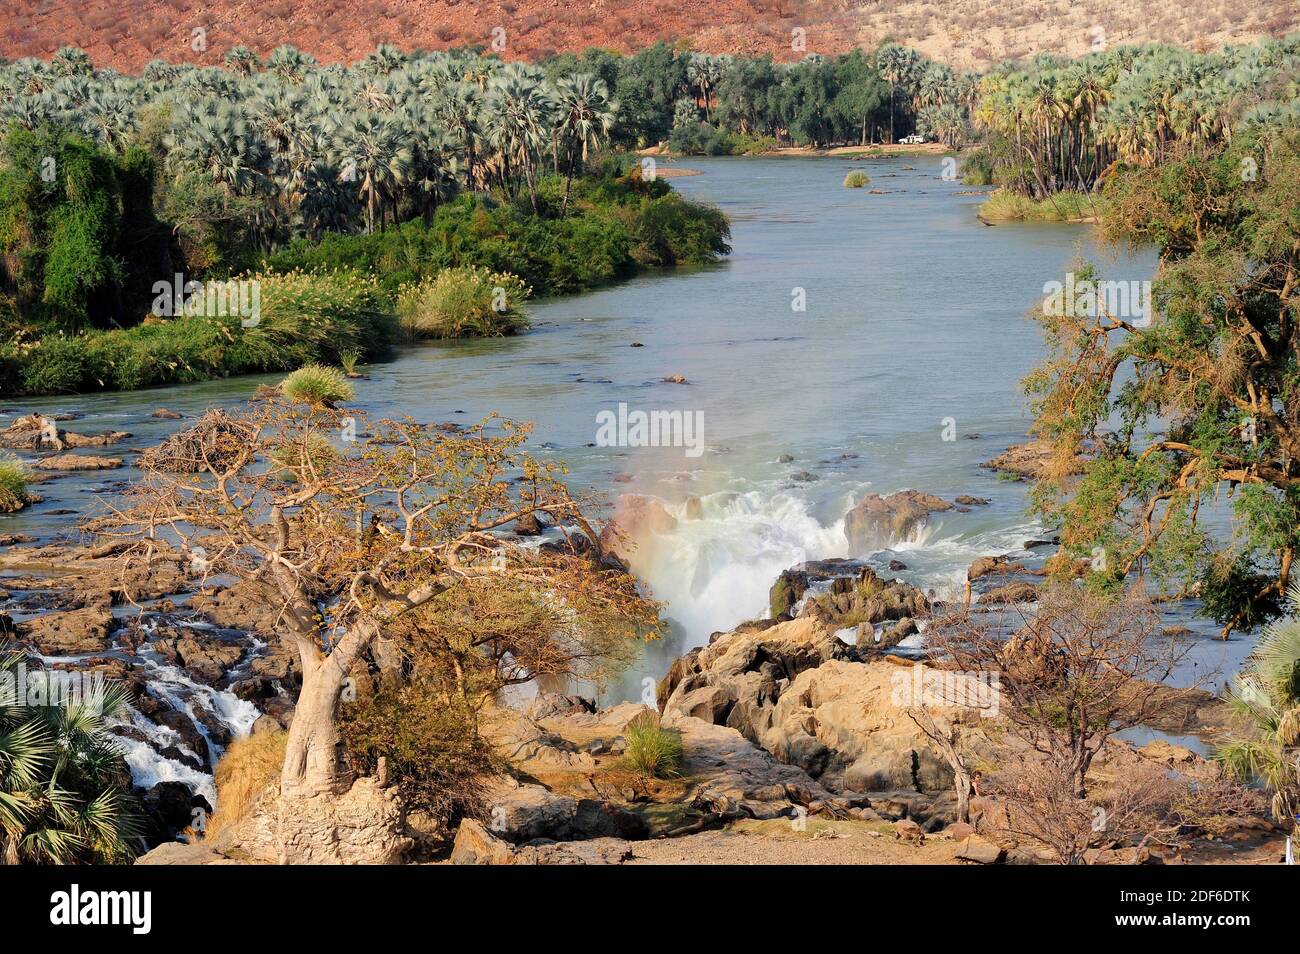 Epupa falls and Kunene river, border between Angola and Namibia. Riparian forest with real fan palm (Hyphaene petersiana) and baobabs. Kunene region, Stock Photo